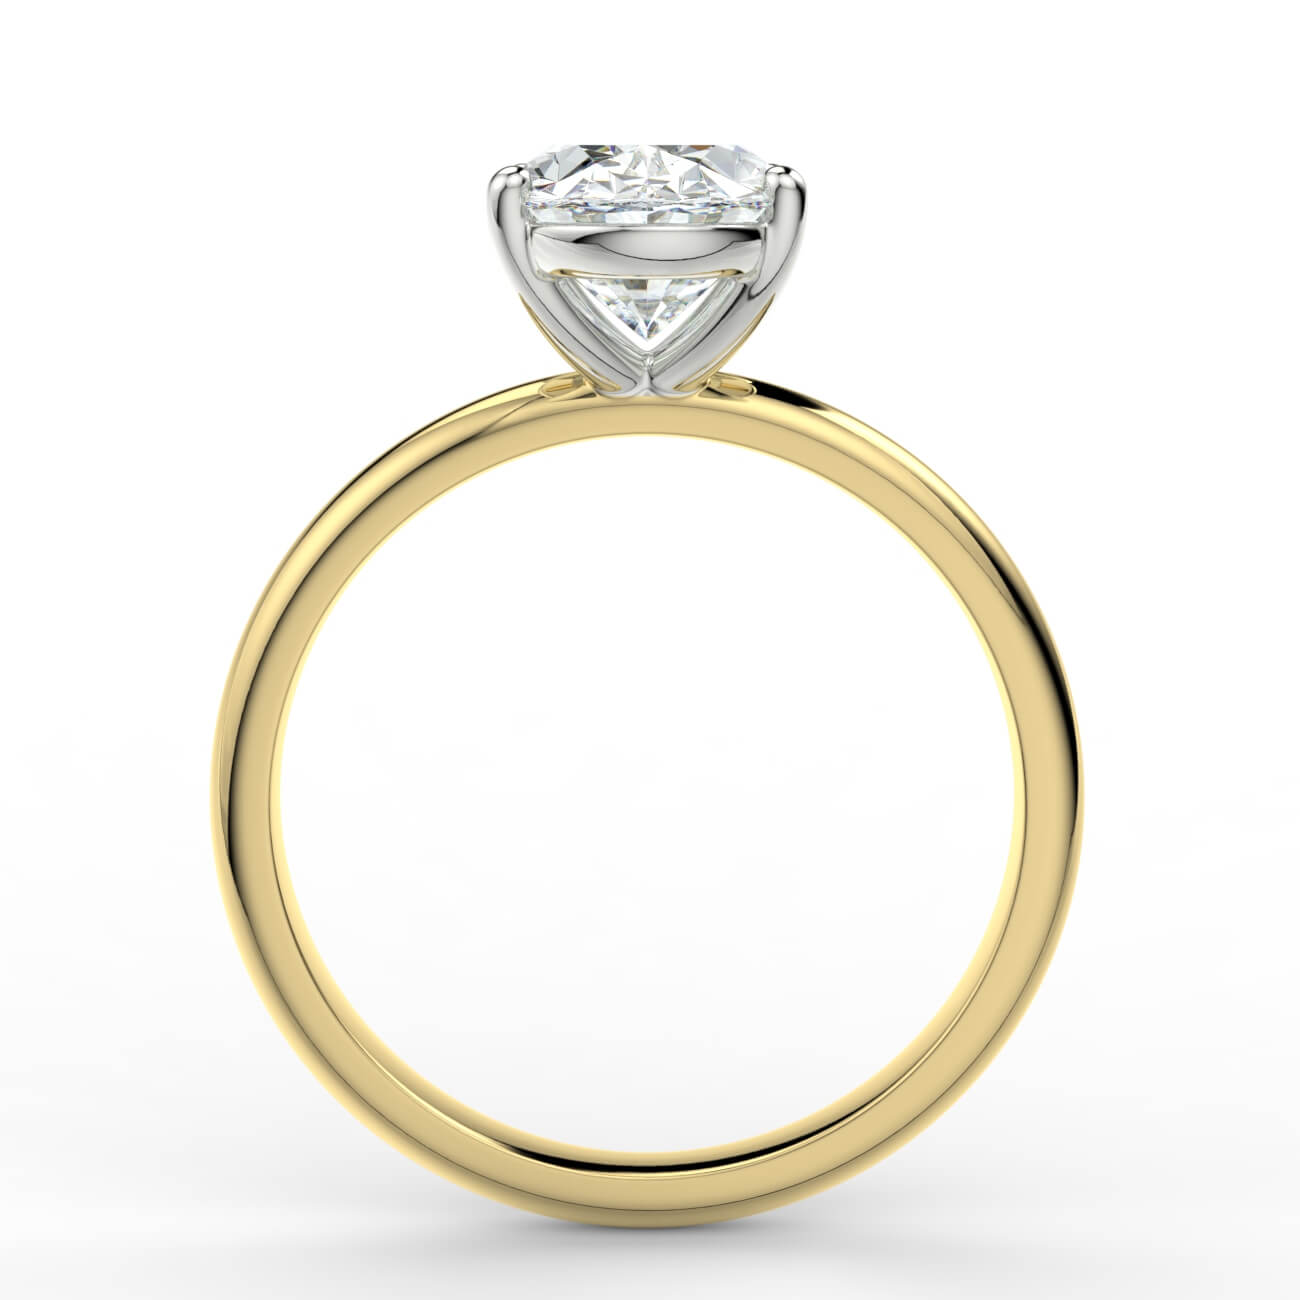 Solitaire oval diamond engagement ring in yellow and white gold – Australian Diamond Network